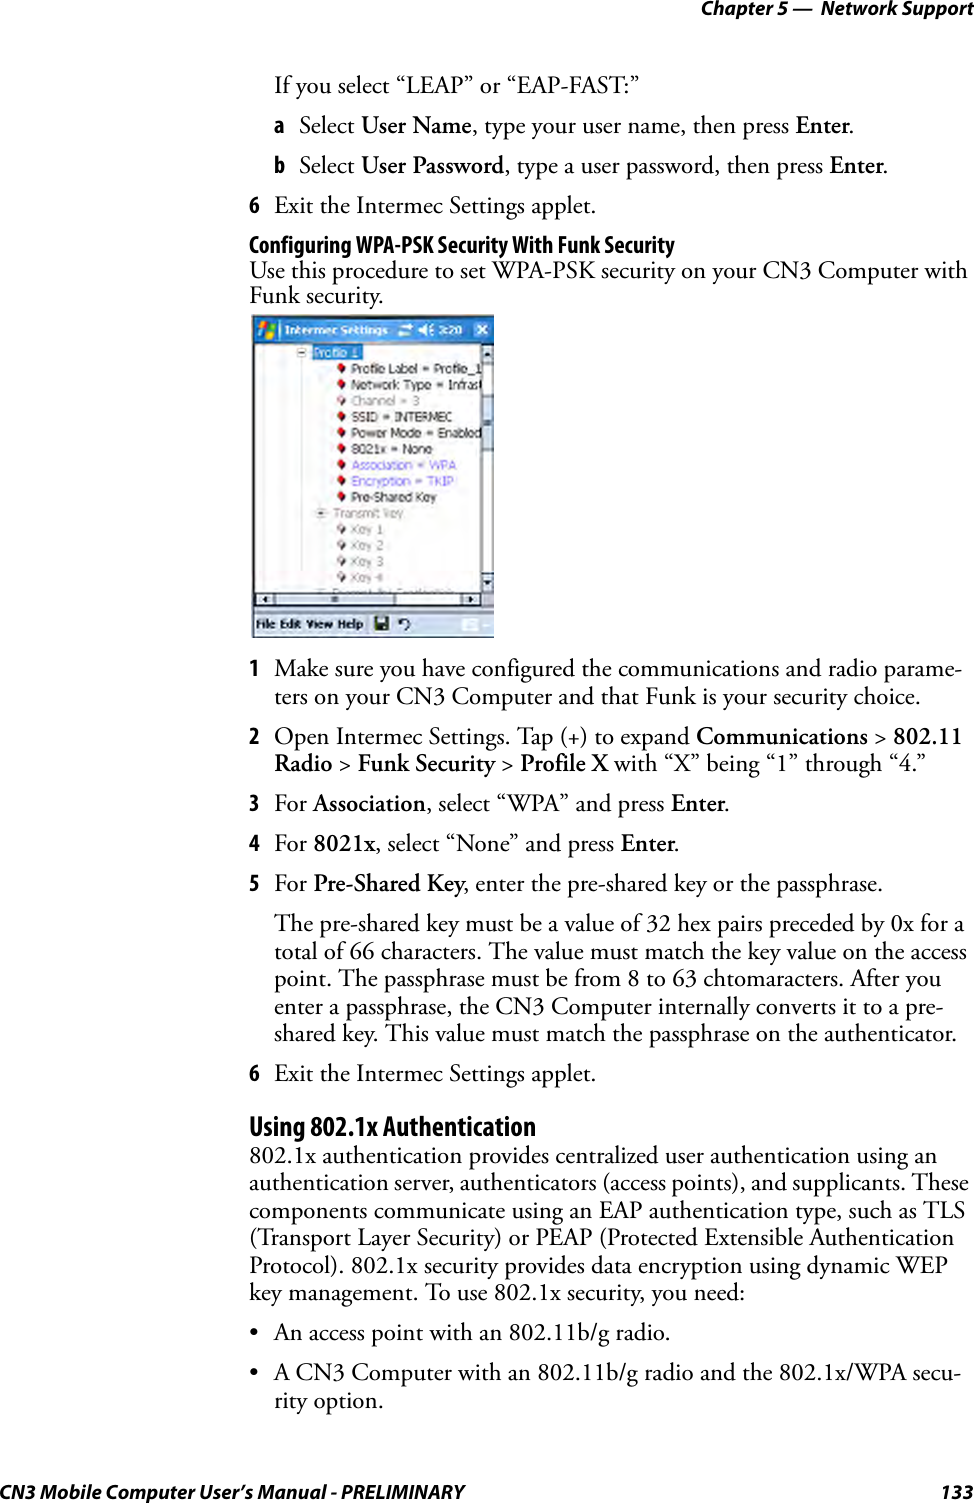 Chapter 5 —  Network SupportCN3 Mobile Computer User’s Manual - PRELIMINARY 133If you select “LEAP” or “EAP-FAST:”aSelect User Name, type your user name, then press Enter.bSelect User Password, type a user password, then press Enter.6Exit the Intermec Settings applet.Configuring WPA-PSK Security With Funk SecurityUse this procedure to set WPA-PSK security on your CN3 Computer with Funk security.1Make sure you have configured the communications and radio parame-ters on your CN3 Computer and that Funk is your security choice.2Open Intermec Settings. Tap (+) to expand Communications &gt; 802.11 Radio &gt; Funk Security &gt; Profile X with “X” being “1” through “4.”3For Association, select “WPA” and press Enter.4For 8021x, select “None” and press Enter.5For Pre-Shared Key, enter the pre-shared key or the passphrase.The pre-shared key must be a value of 32 hex pairs preceded by 0x for a total of 66 characters. The value must match the key value on the access point. The passphrase must be from 8 to 63 chtomaracters. After you enter a passphrase, the CN3 Computer internally converts it to a pre-shared key. This value must match the passphrase on the authenticator.6Exit the Intermec Settings applet.Using 802.1x Authentication802.1x authentication provides centralized user authentication using an authentication server, authenticators (access points), and supplicants. These components communicate using an EAP authentication type, such as TLS (Transport Layer Security) or PEAP (Protected Extensible Authentication Protocol). 802.1x security provides data encryption using dynamic WEP key management. To use 802.1x security, you need:• An access point with an 802.11b/g radio.• A CN3 Computer with an 802.11b/g radio and the 802.1x/WPA secu-rity option.